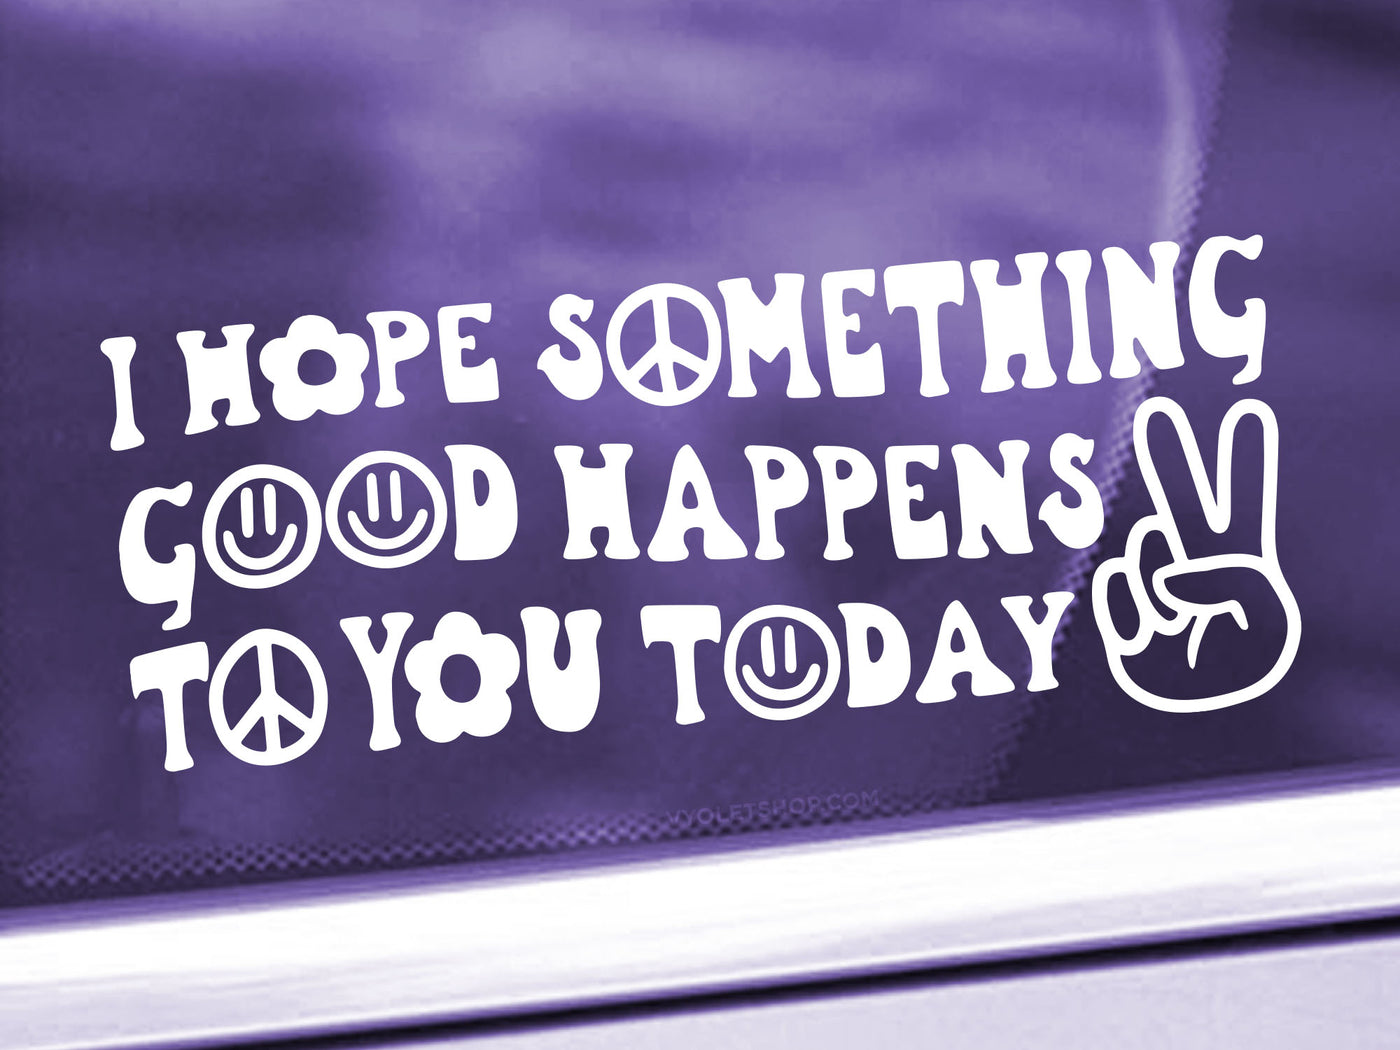 I Hope Something Good Happens To You Today Decal - Peace Sign - Inspirational Decal Sticker - Nice Happy Window Decal - Smiley Face Decal